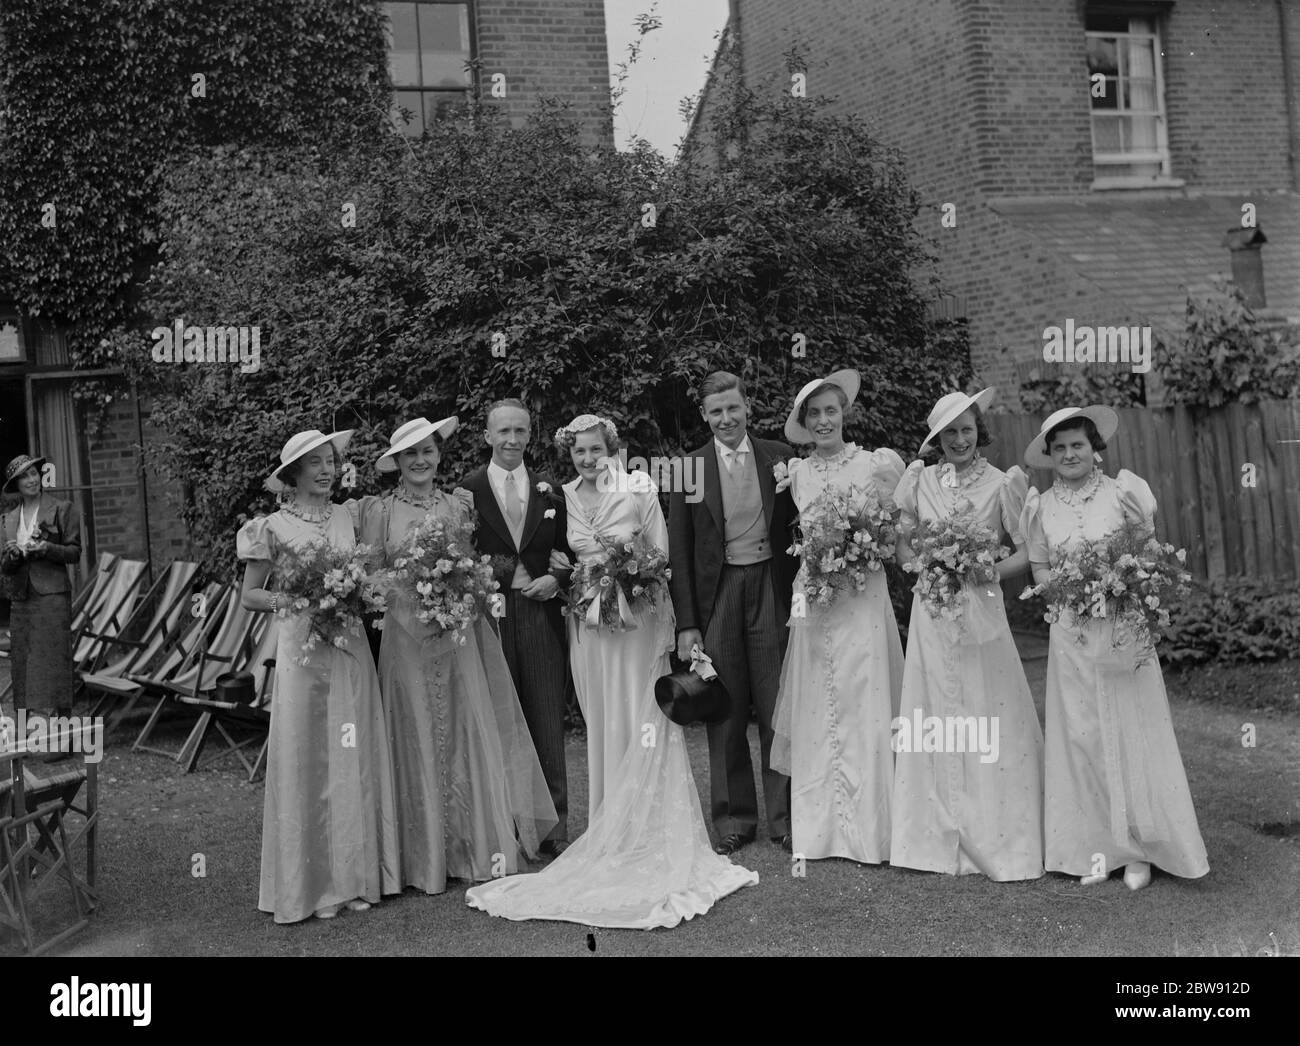 The wedding of Smith and Turnbull . The wedding party . 19 June 1937 Stock Photo